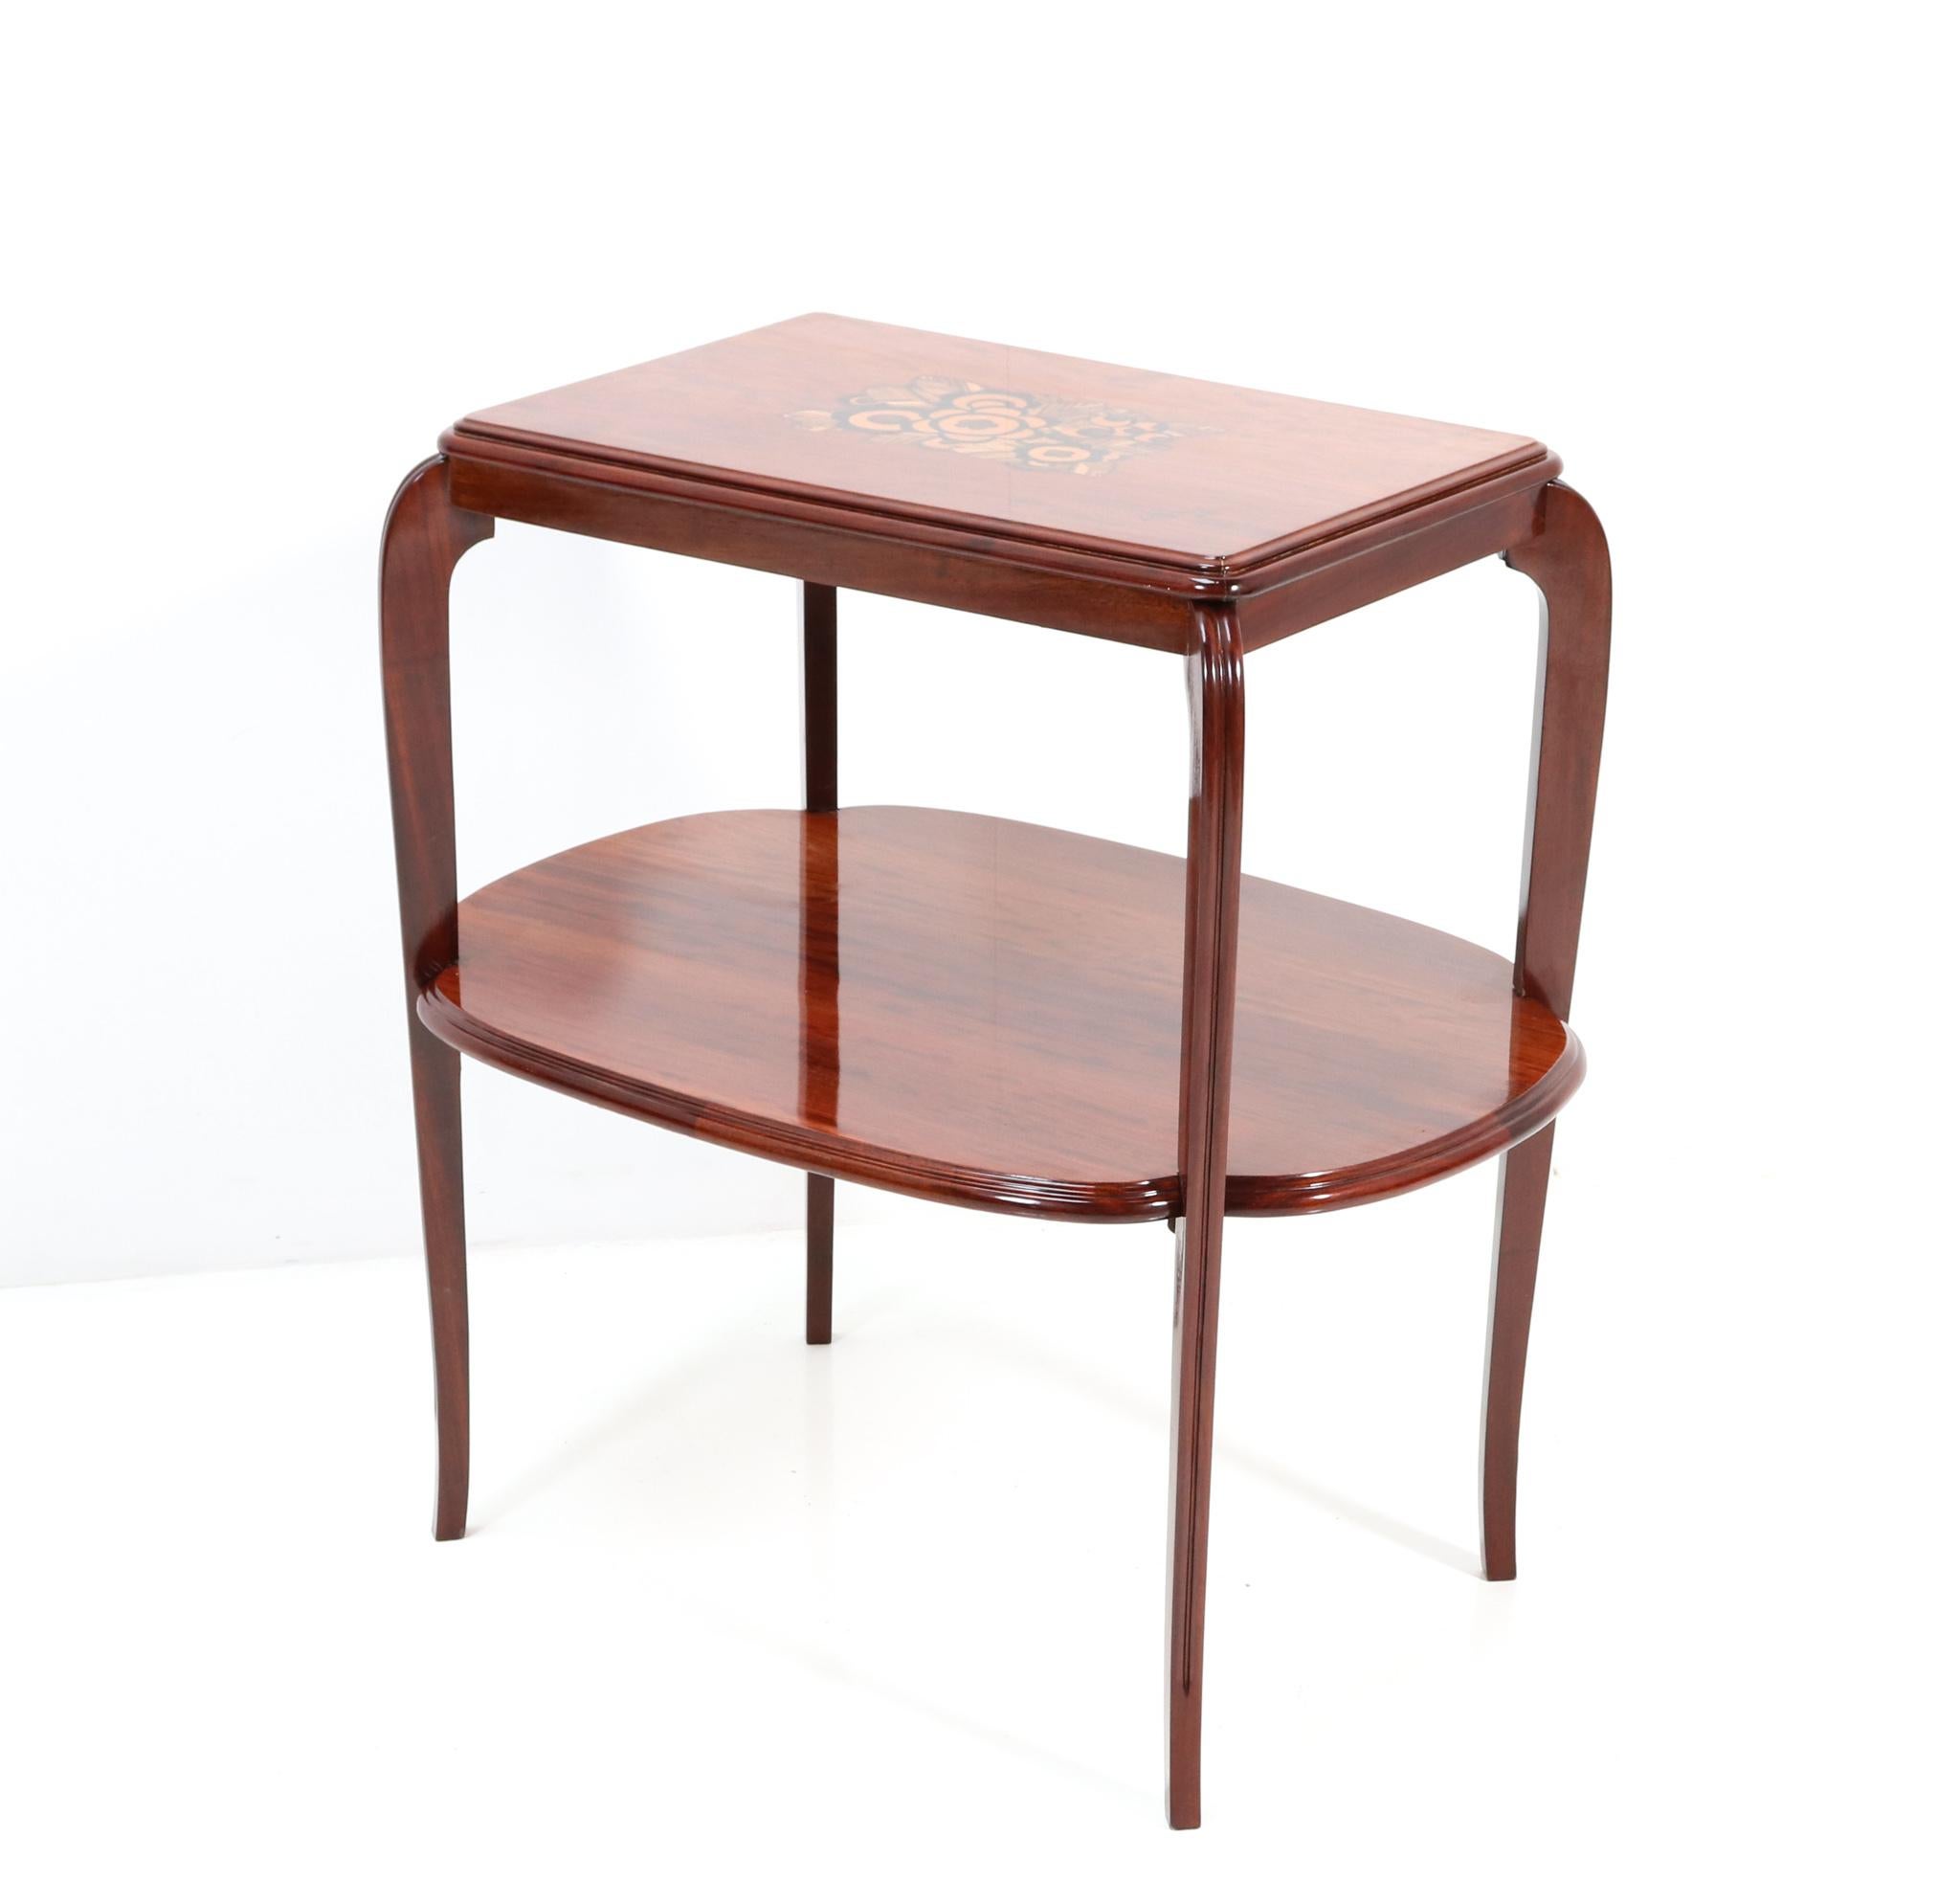 Early 20th Century Walnut Art Deco Side Table with Inlay by Louis Majorelle, 1920s